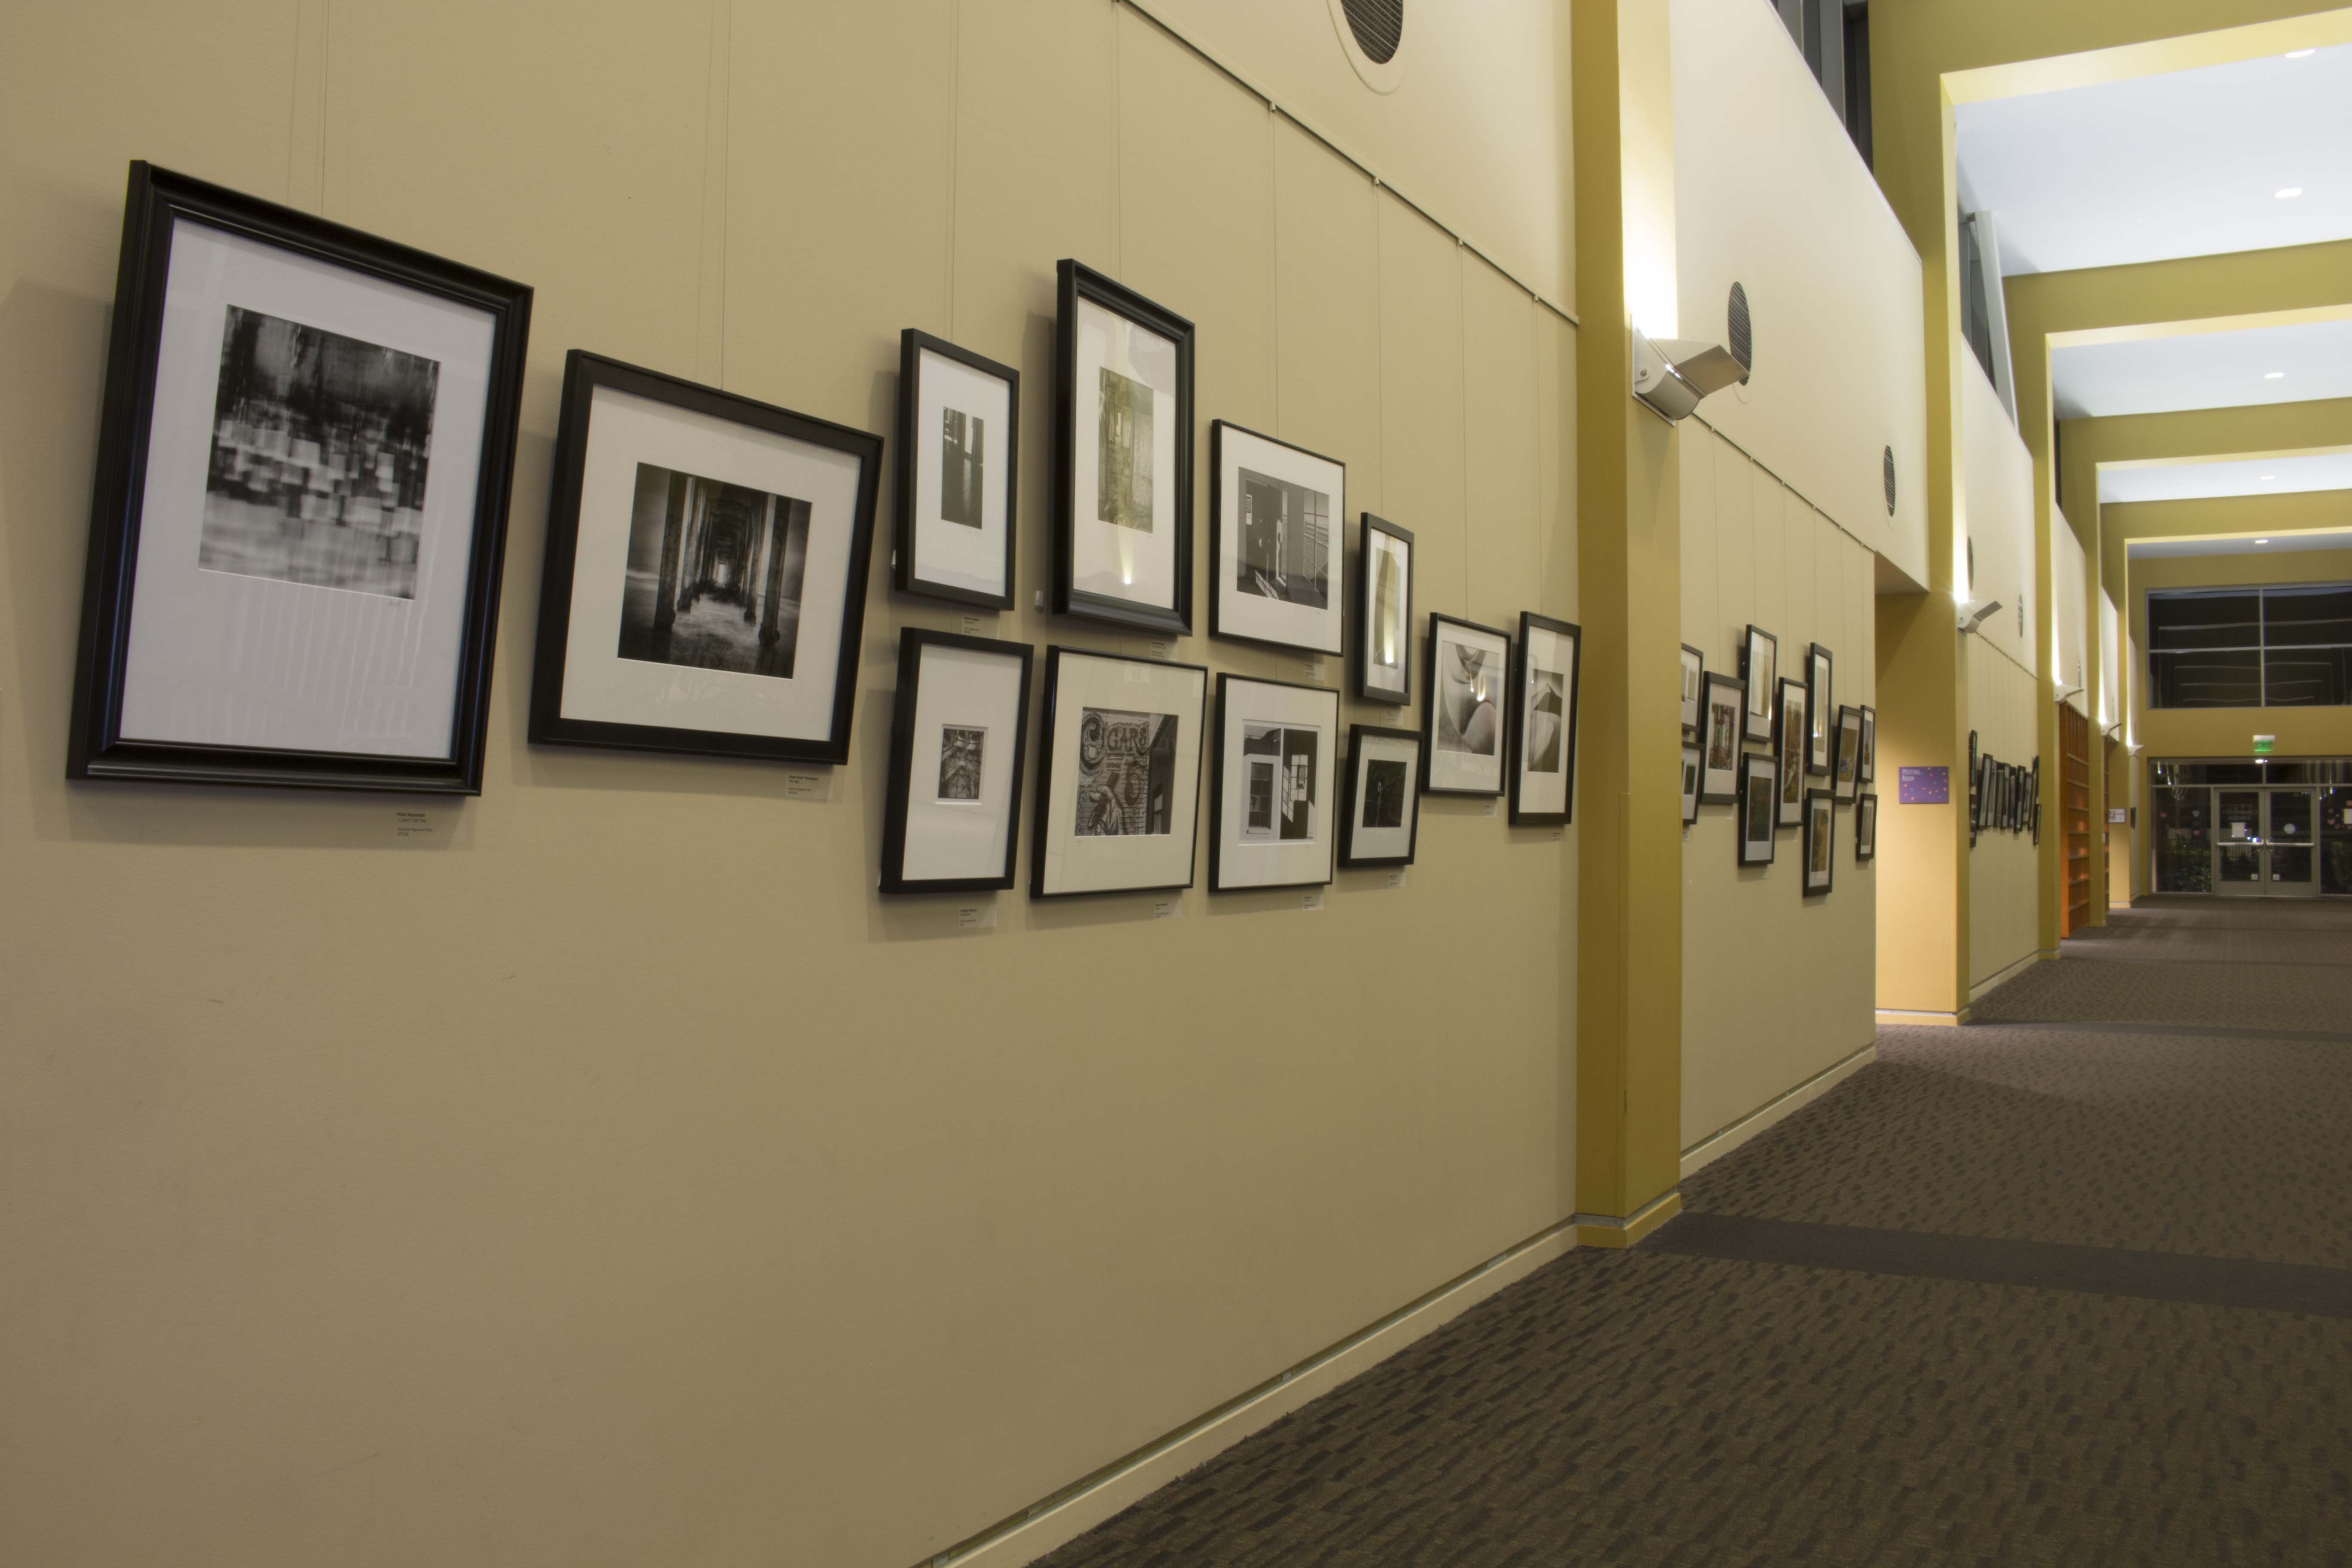 Photos are displayed for sell at the San Marcos Civic Center. Feb. 8 2015. (Belen Ladd/The Telescope)